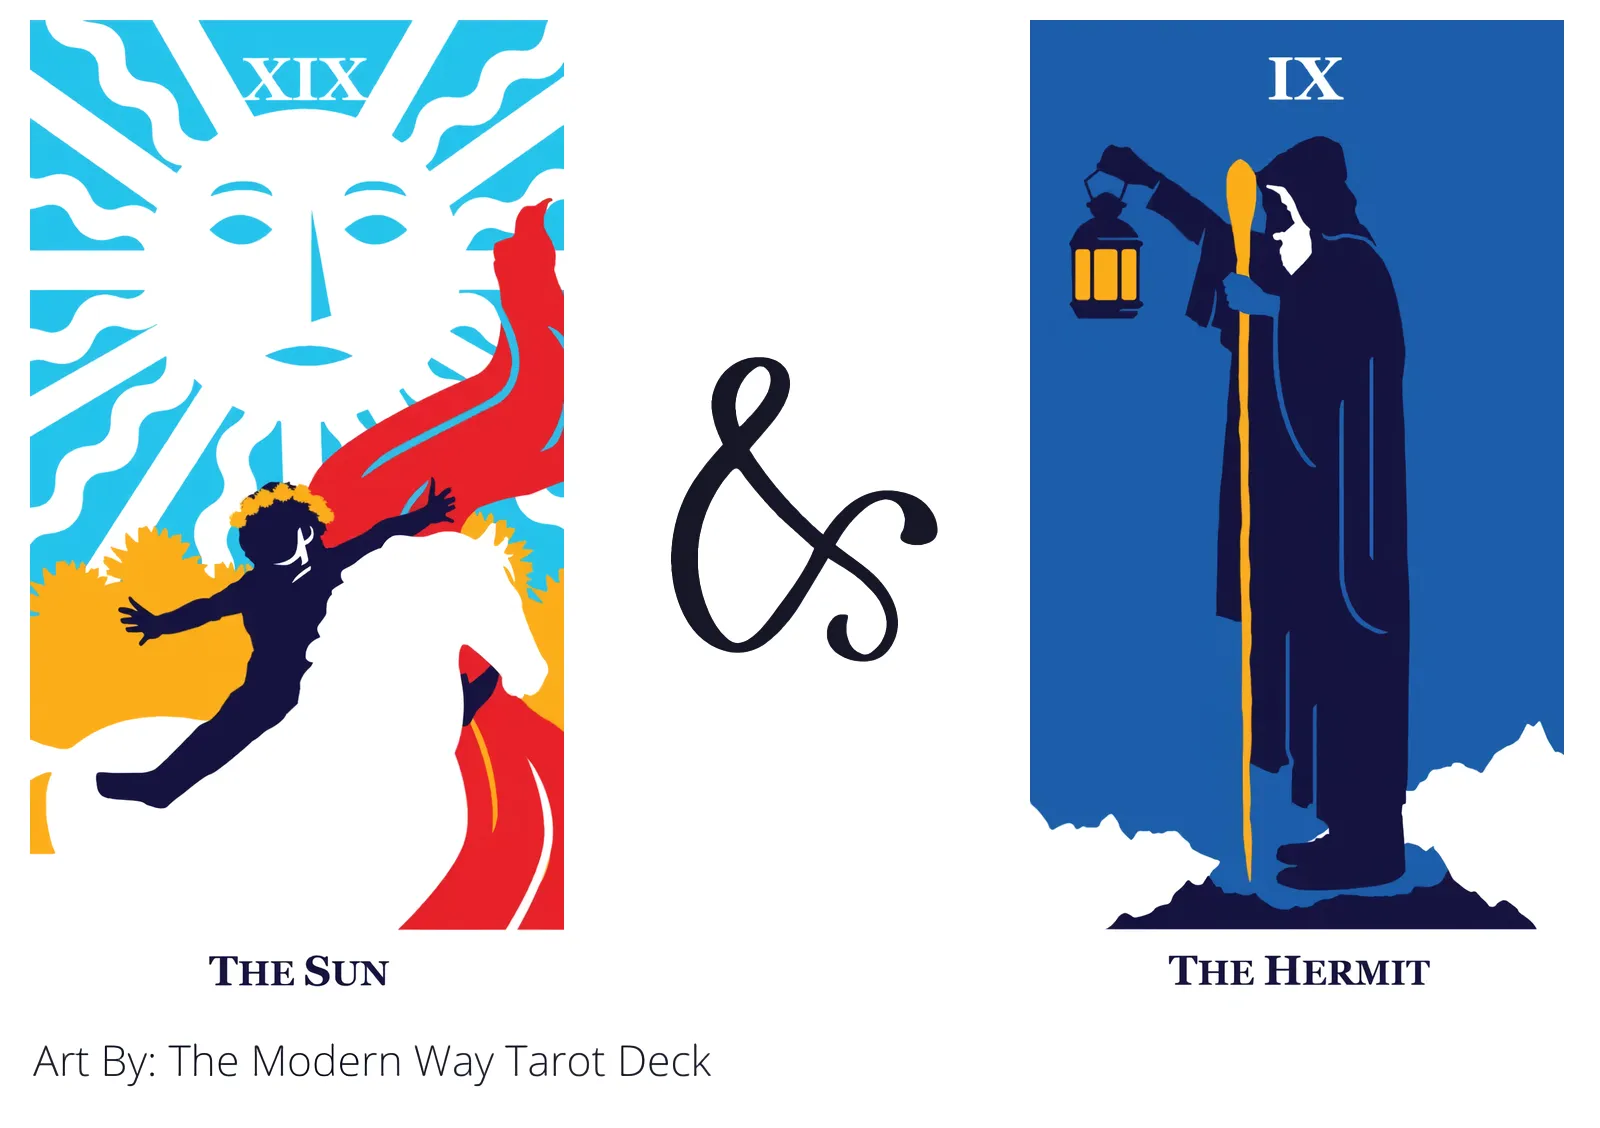 the sun and the hermit tarot cards together